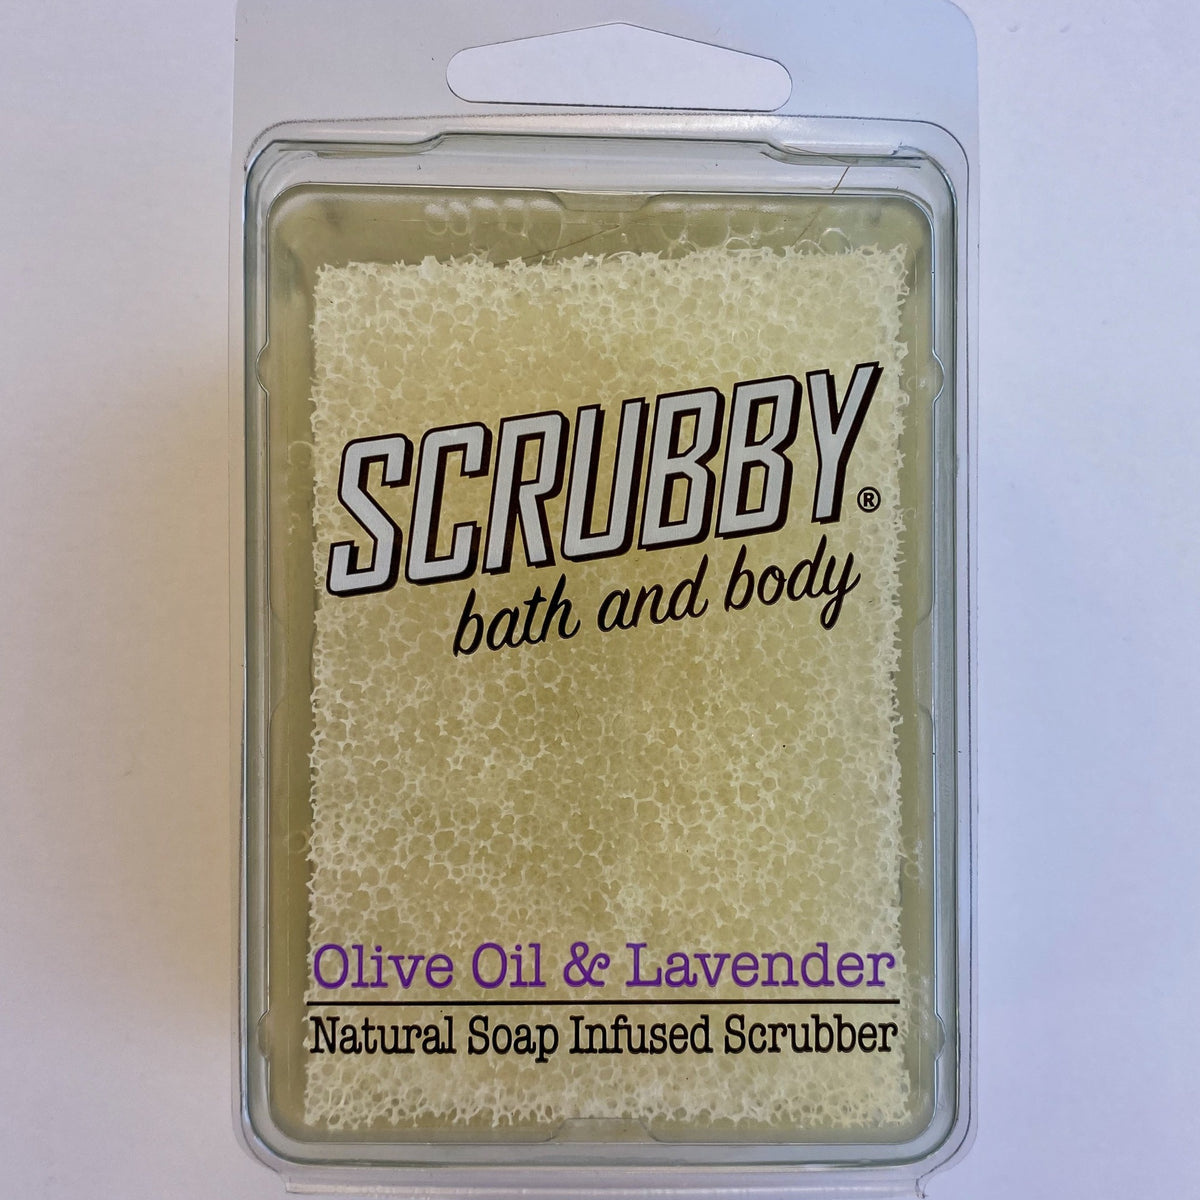 Scrubby Soap Olive Oil and Lavender